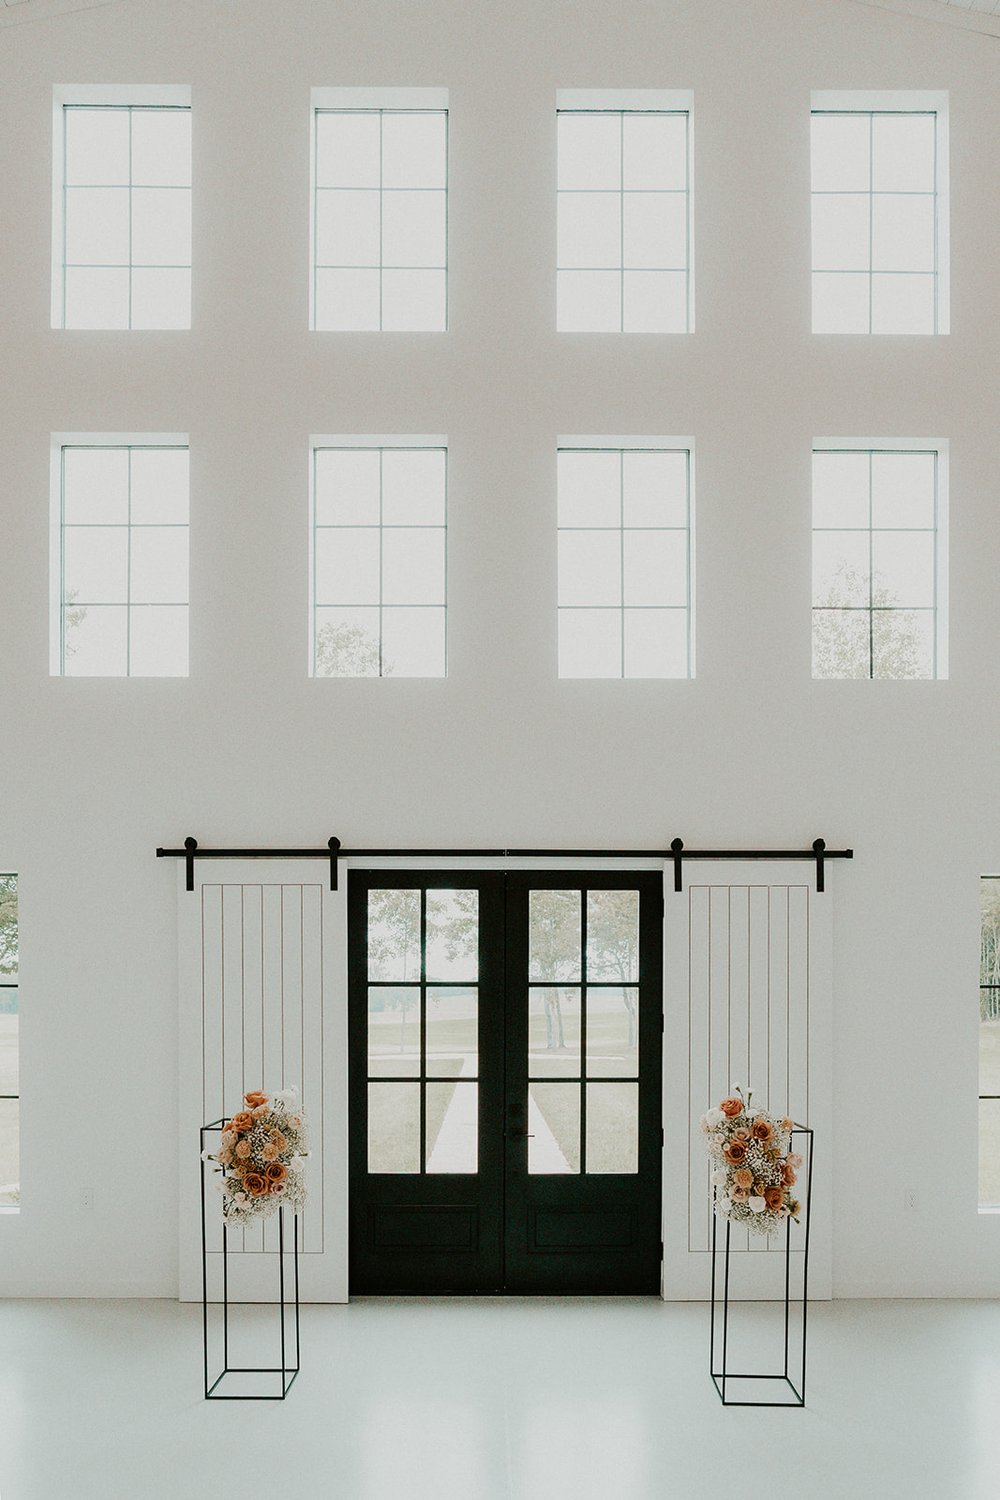 Ceremony aisle with hanging arrangements and black double doors. 